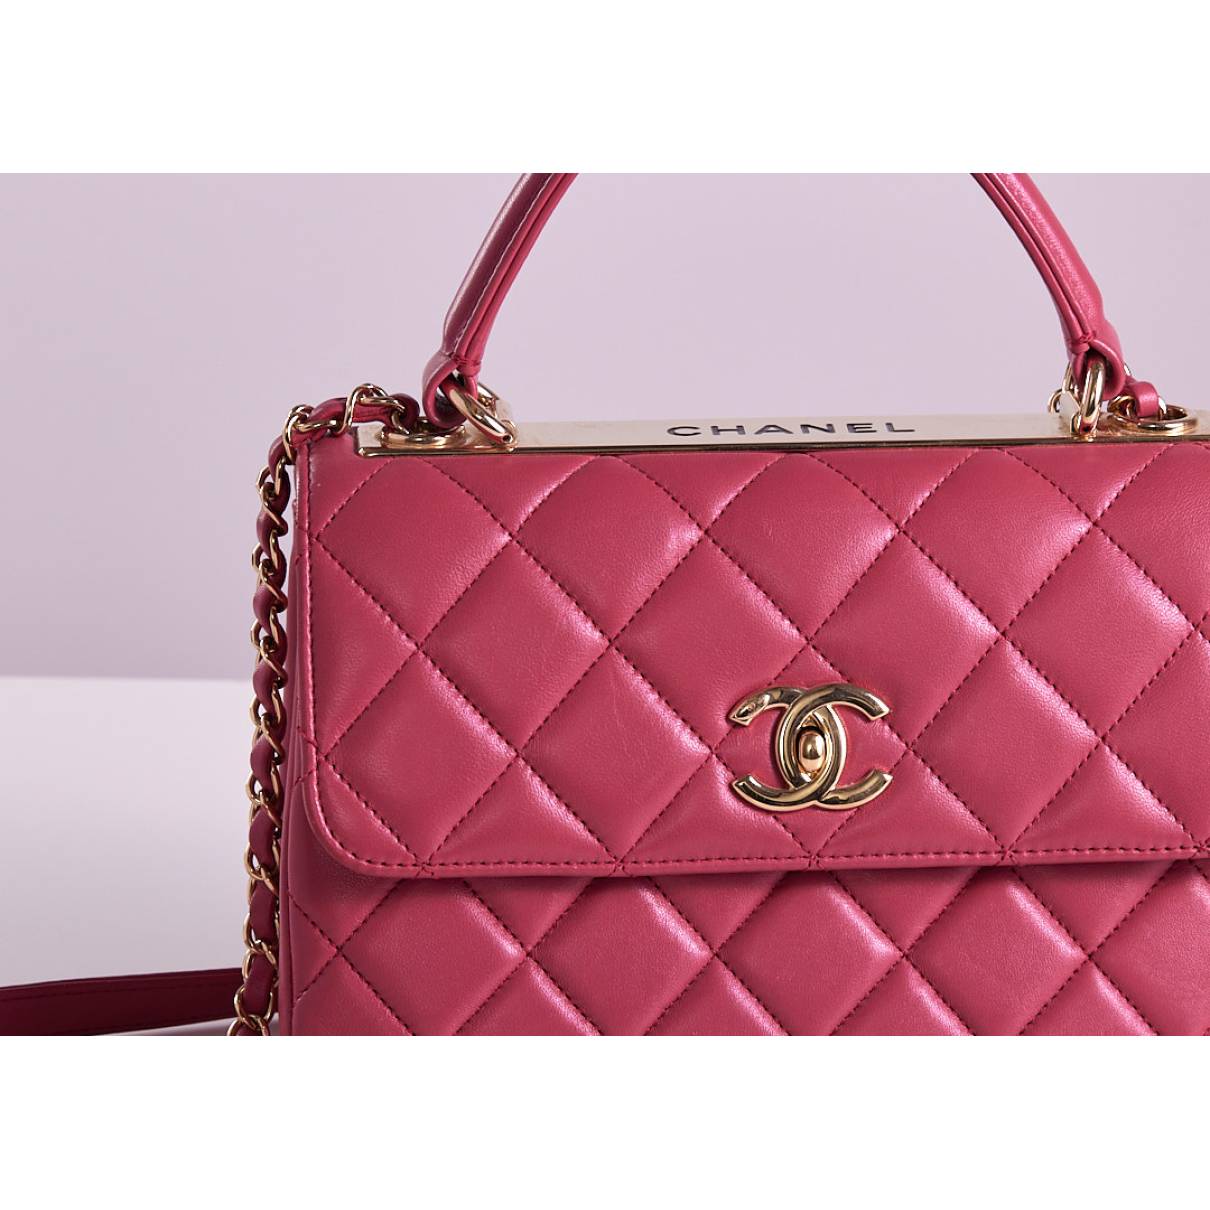 Trendy cc leather handbag Chanel Pink in Leather - 28790789